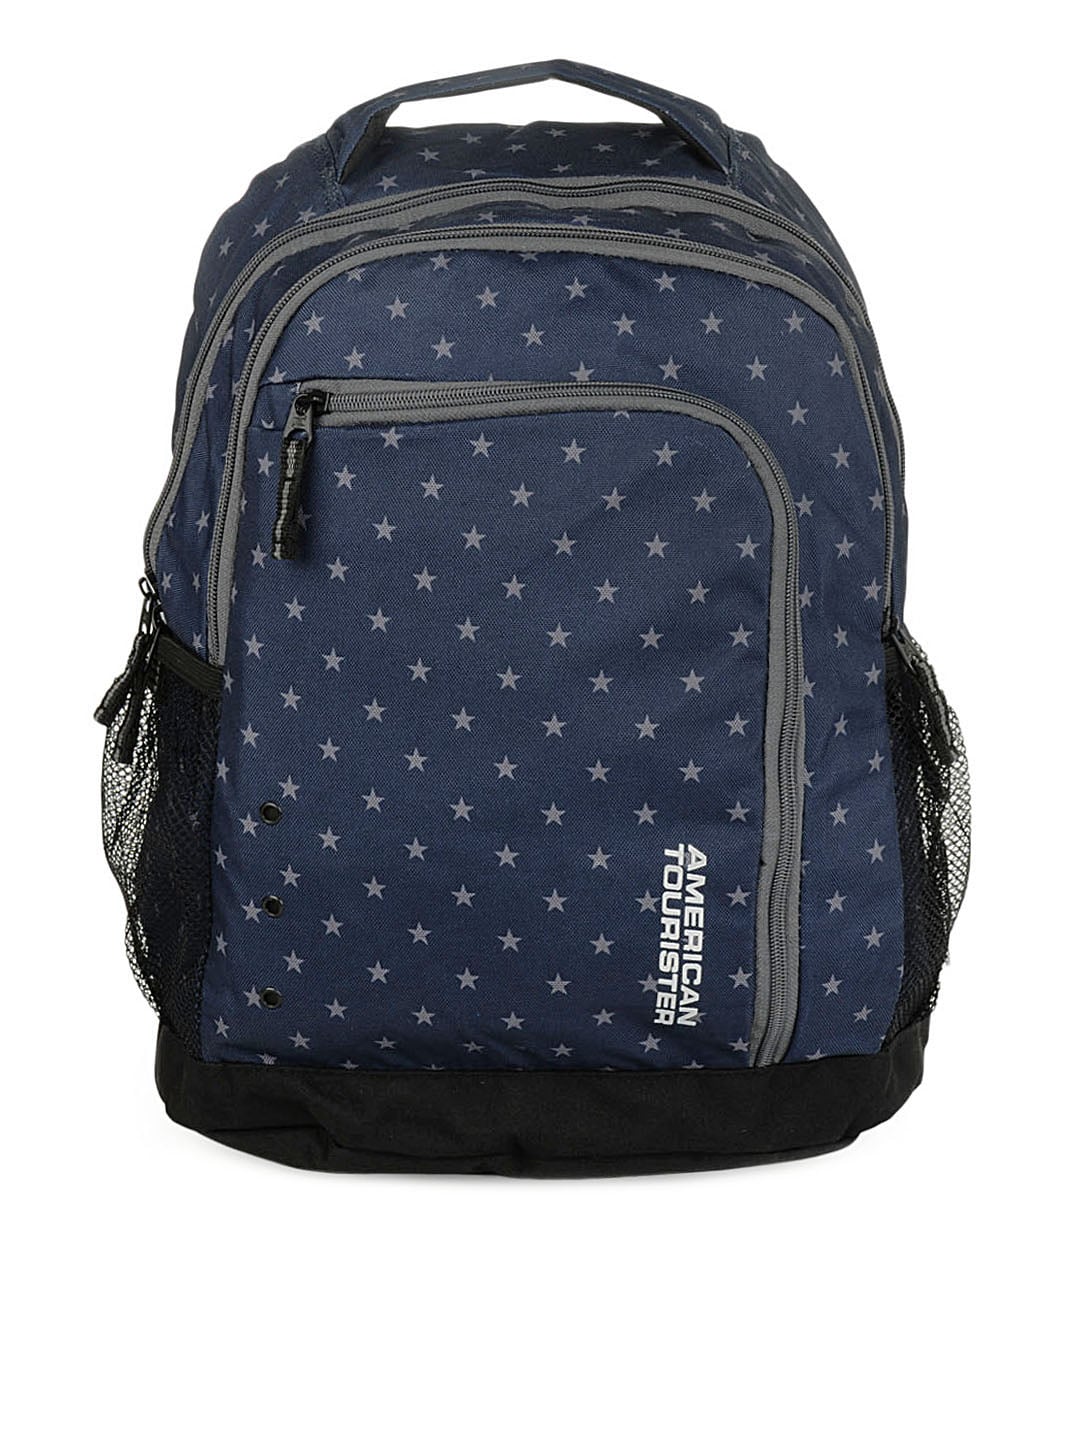 AMERICAN TOURISTER Unisex Blue Printed Backpack